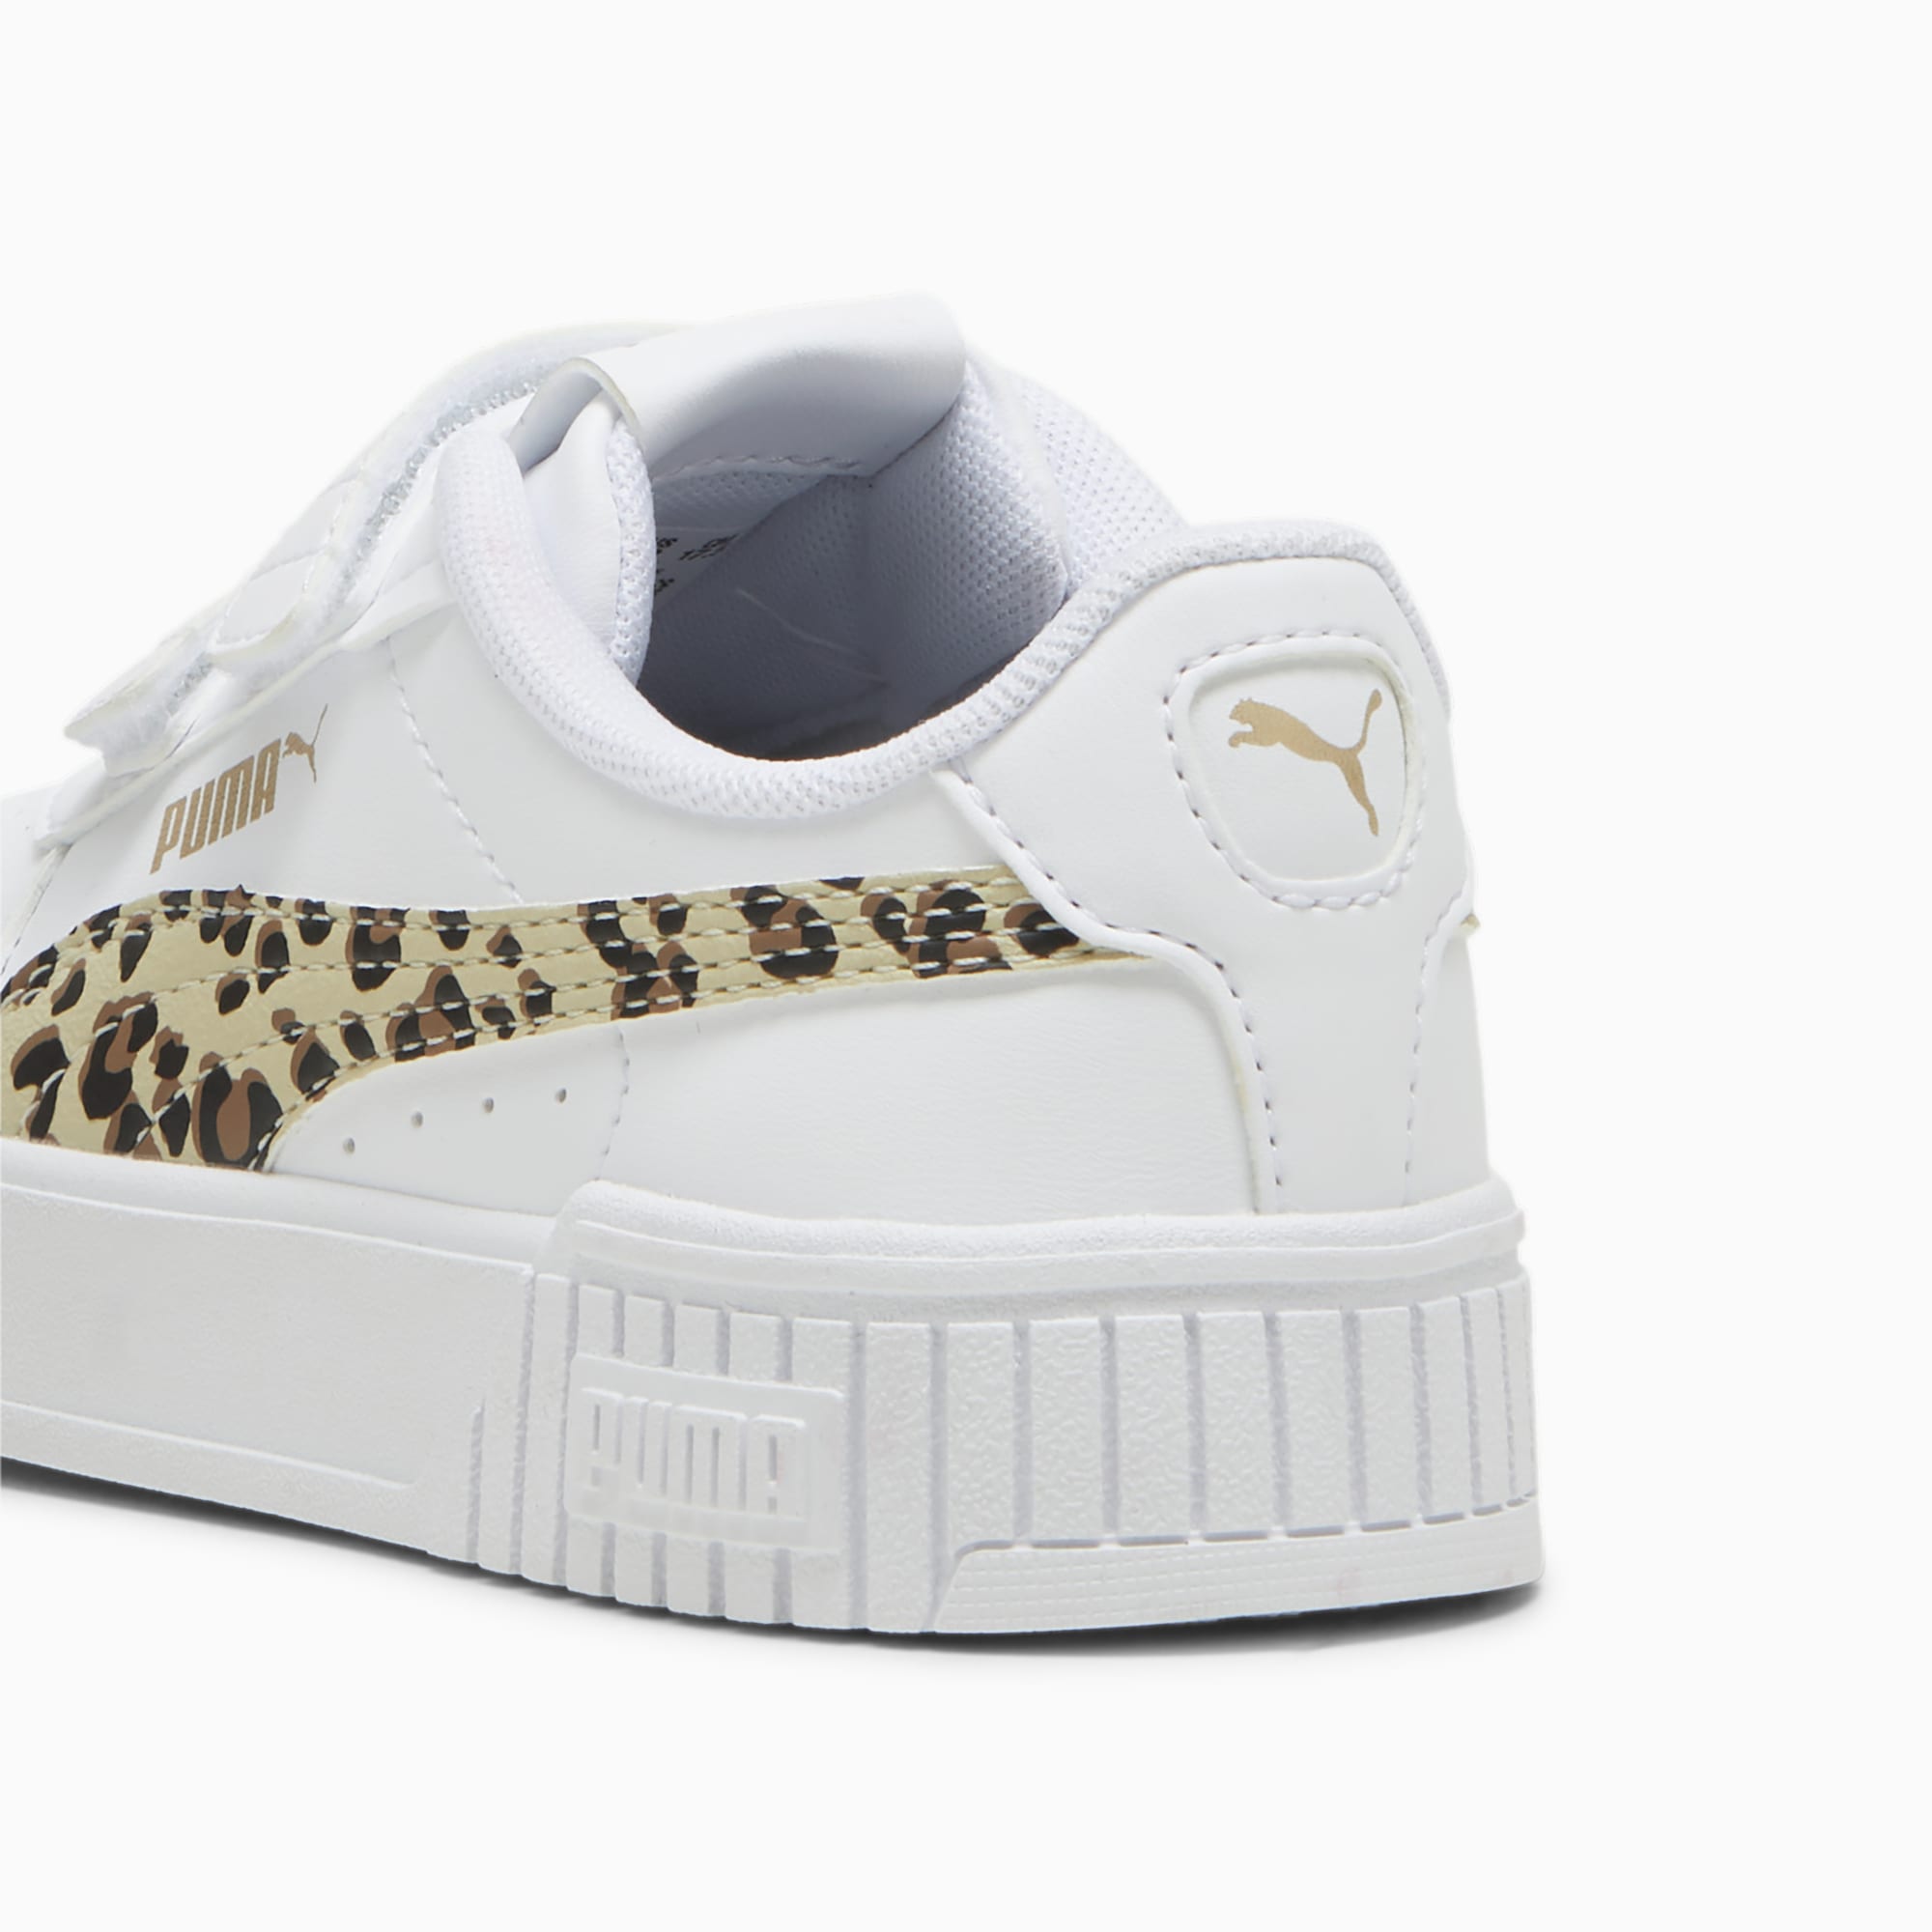 PUMA Carina 2.0 Animal Update Kids' Sneakers, White/Putty/Gold, Size 27,5, Shoes